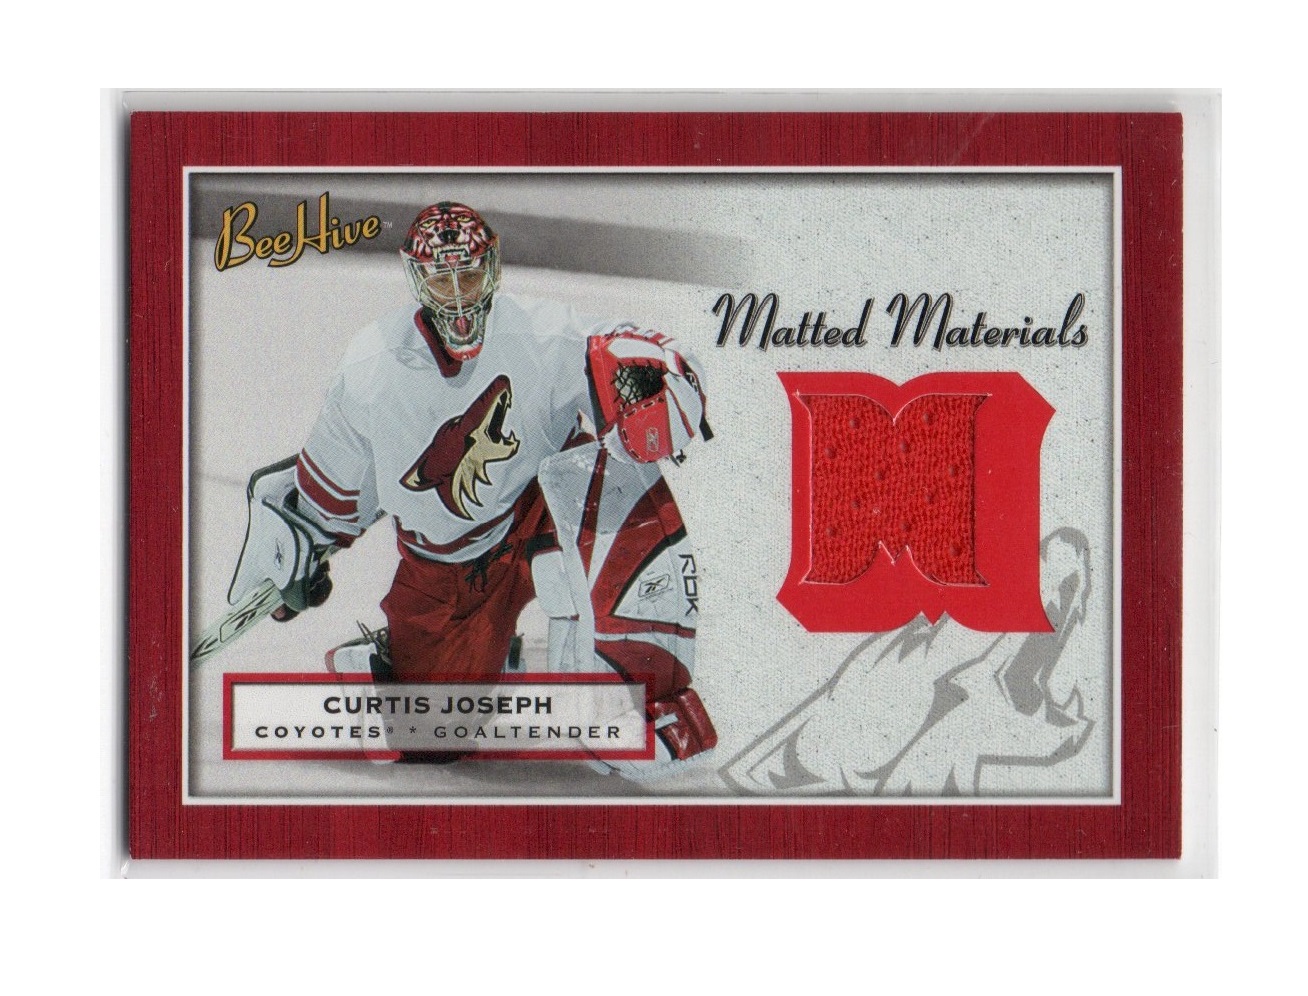 2005-06 Beehive Matted Materials #MMCJ Curtis Joseph (40-X226-GAMEUSED-COYOTES)